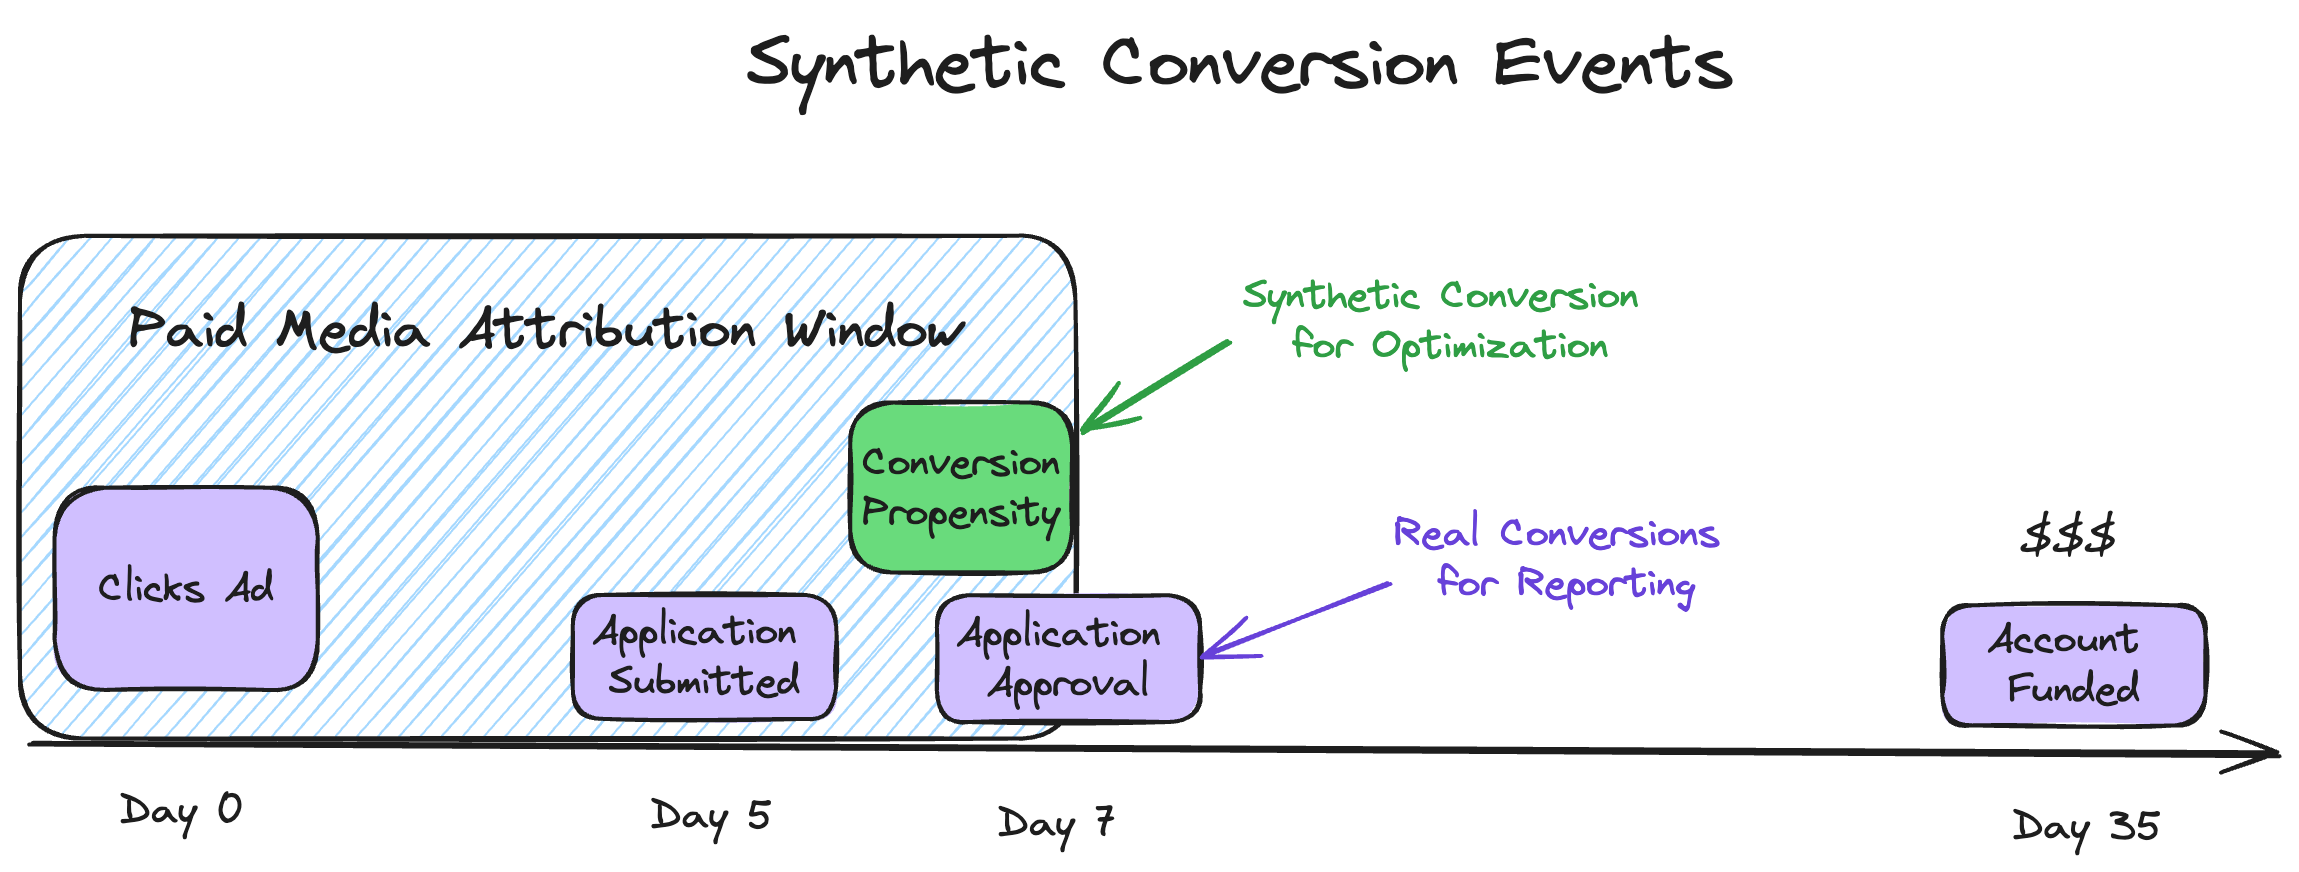 Synthetic Conversions